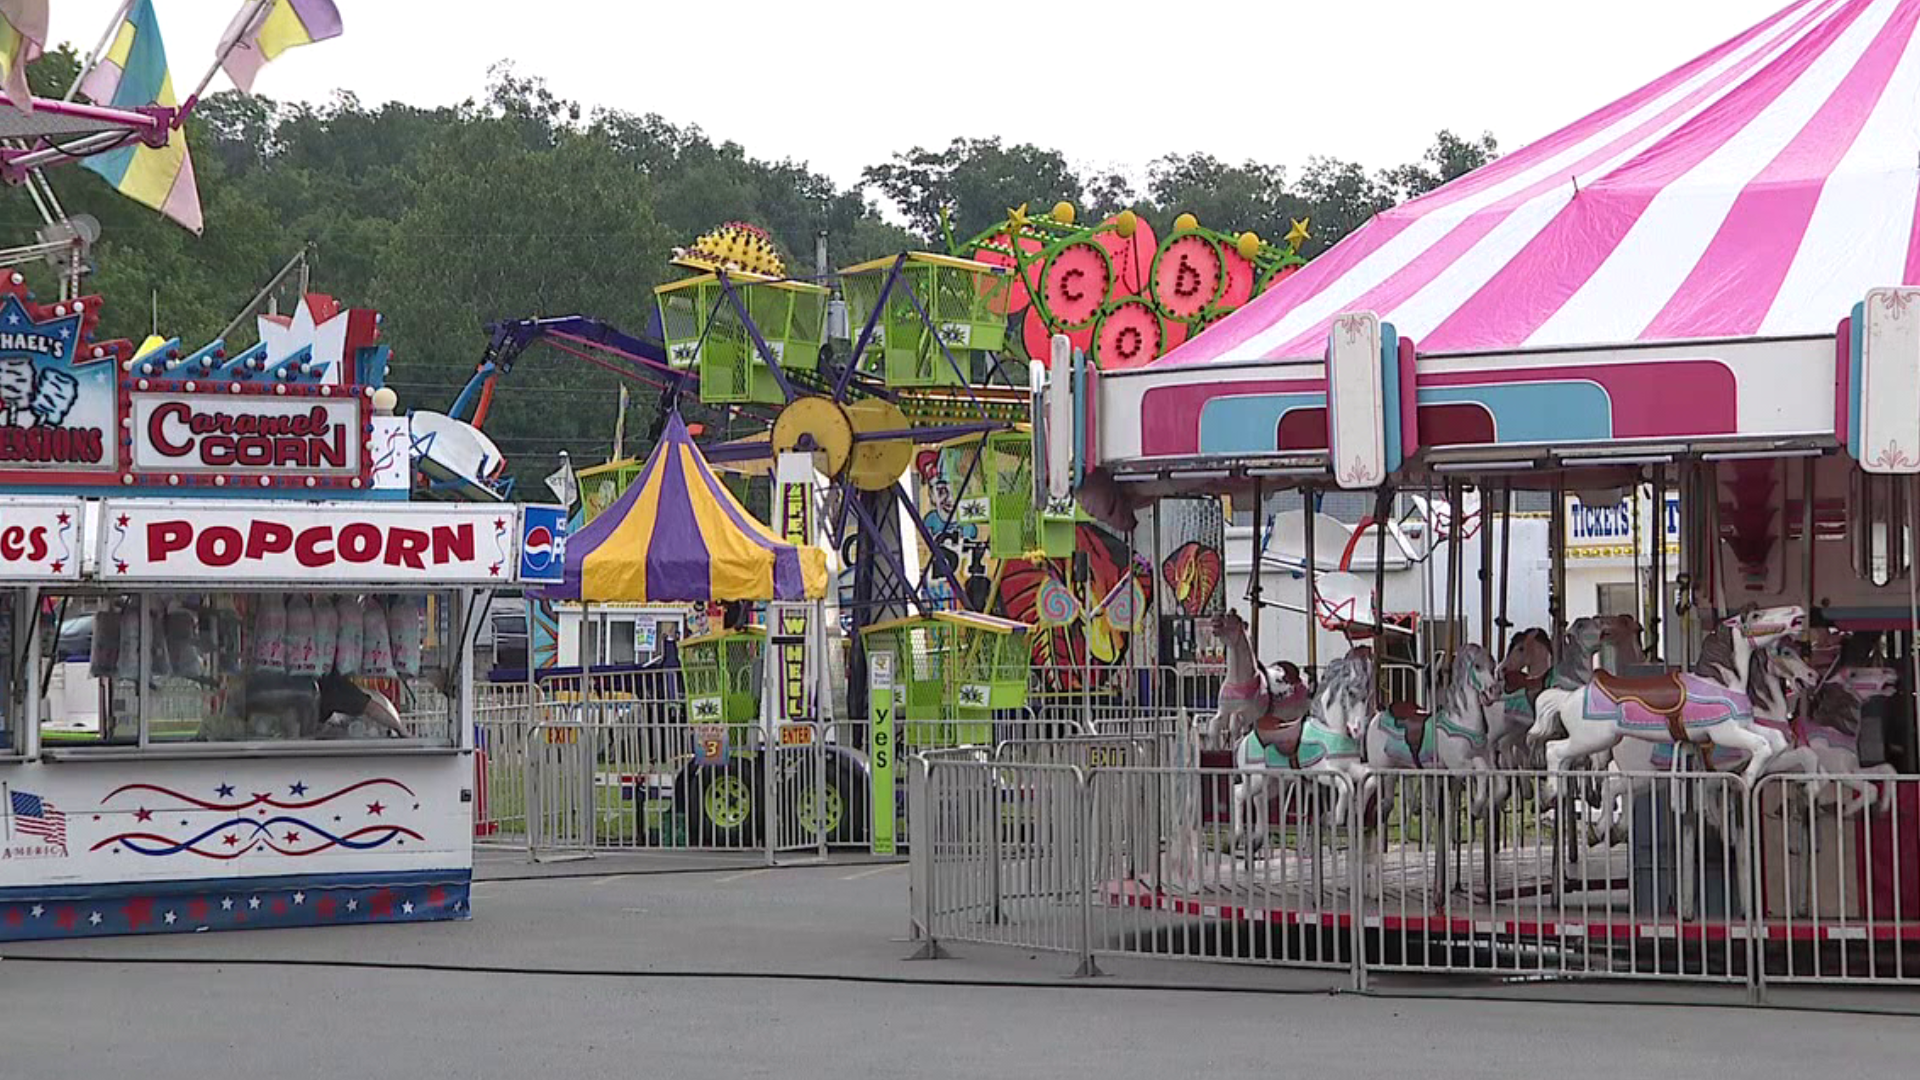 It's been two years since the Pocono Township Volunteer Fire Company Carnival was up and running. It was canceled last year because of the pandemic.